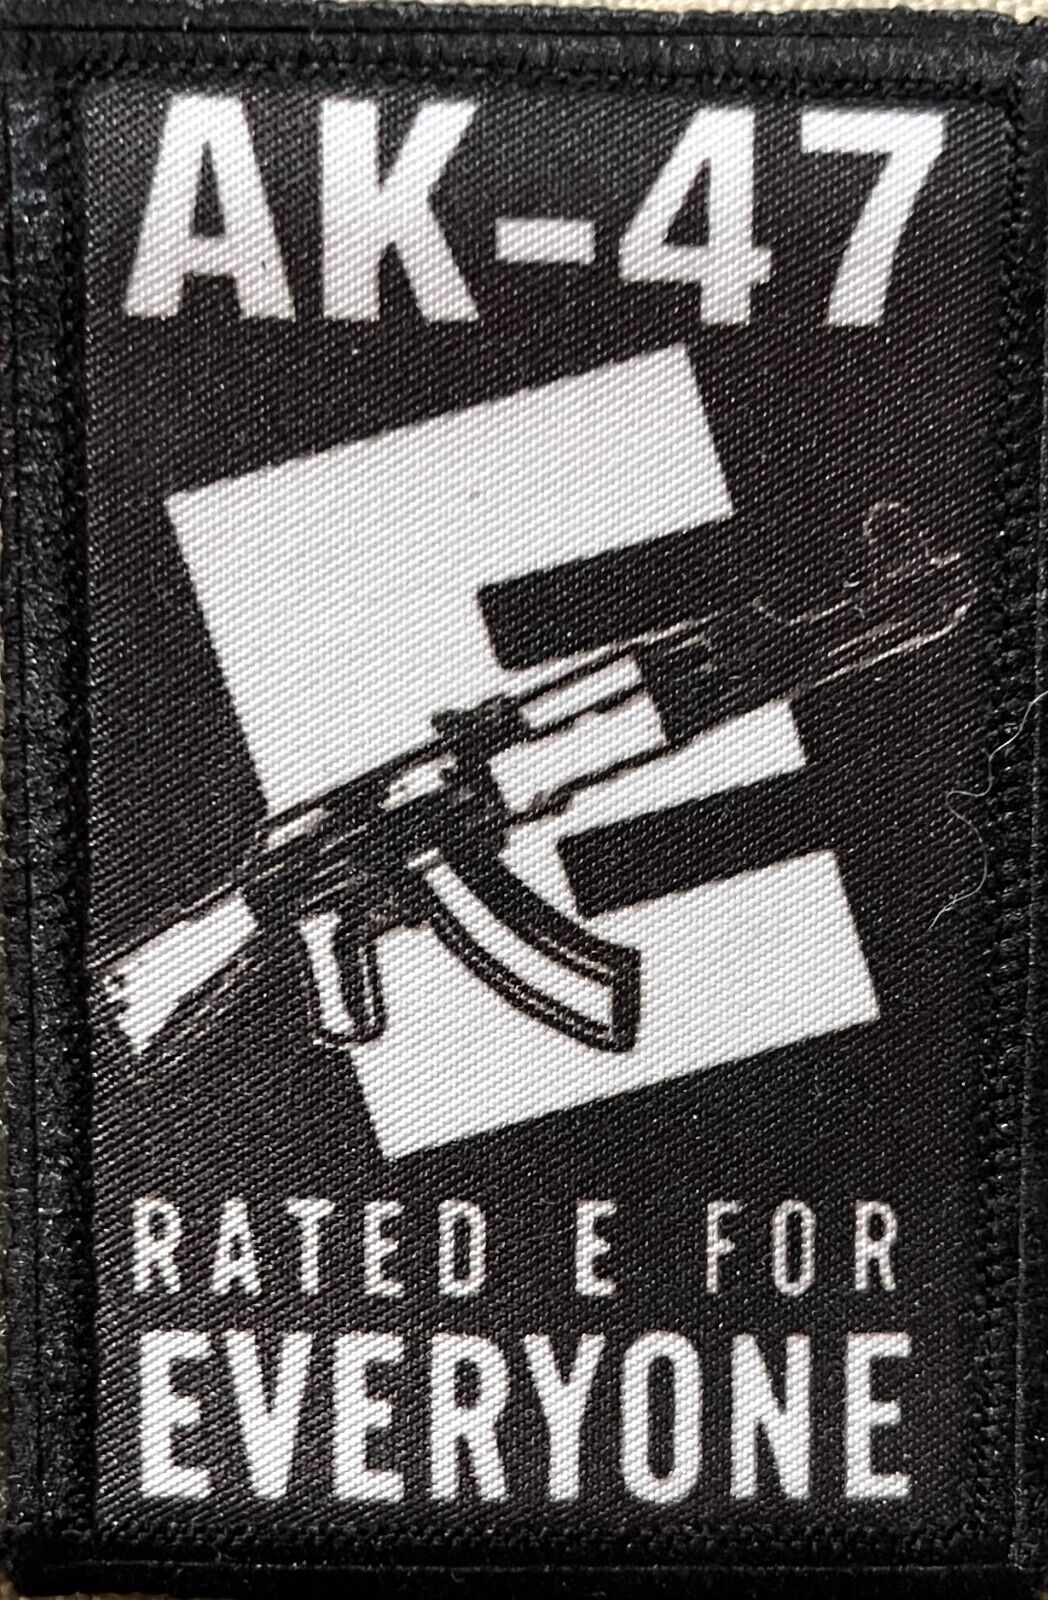 AK-47 Rated E for Everyone Morale Patch Military Tactical